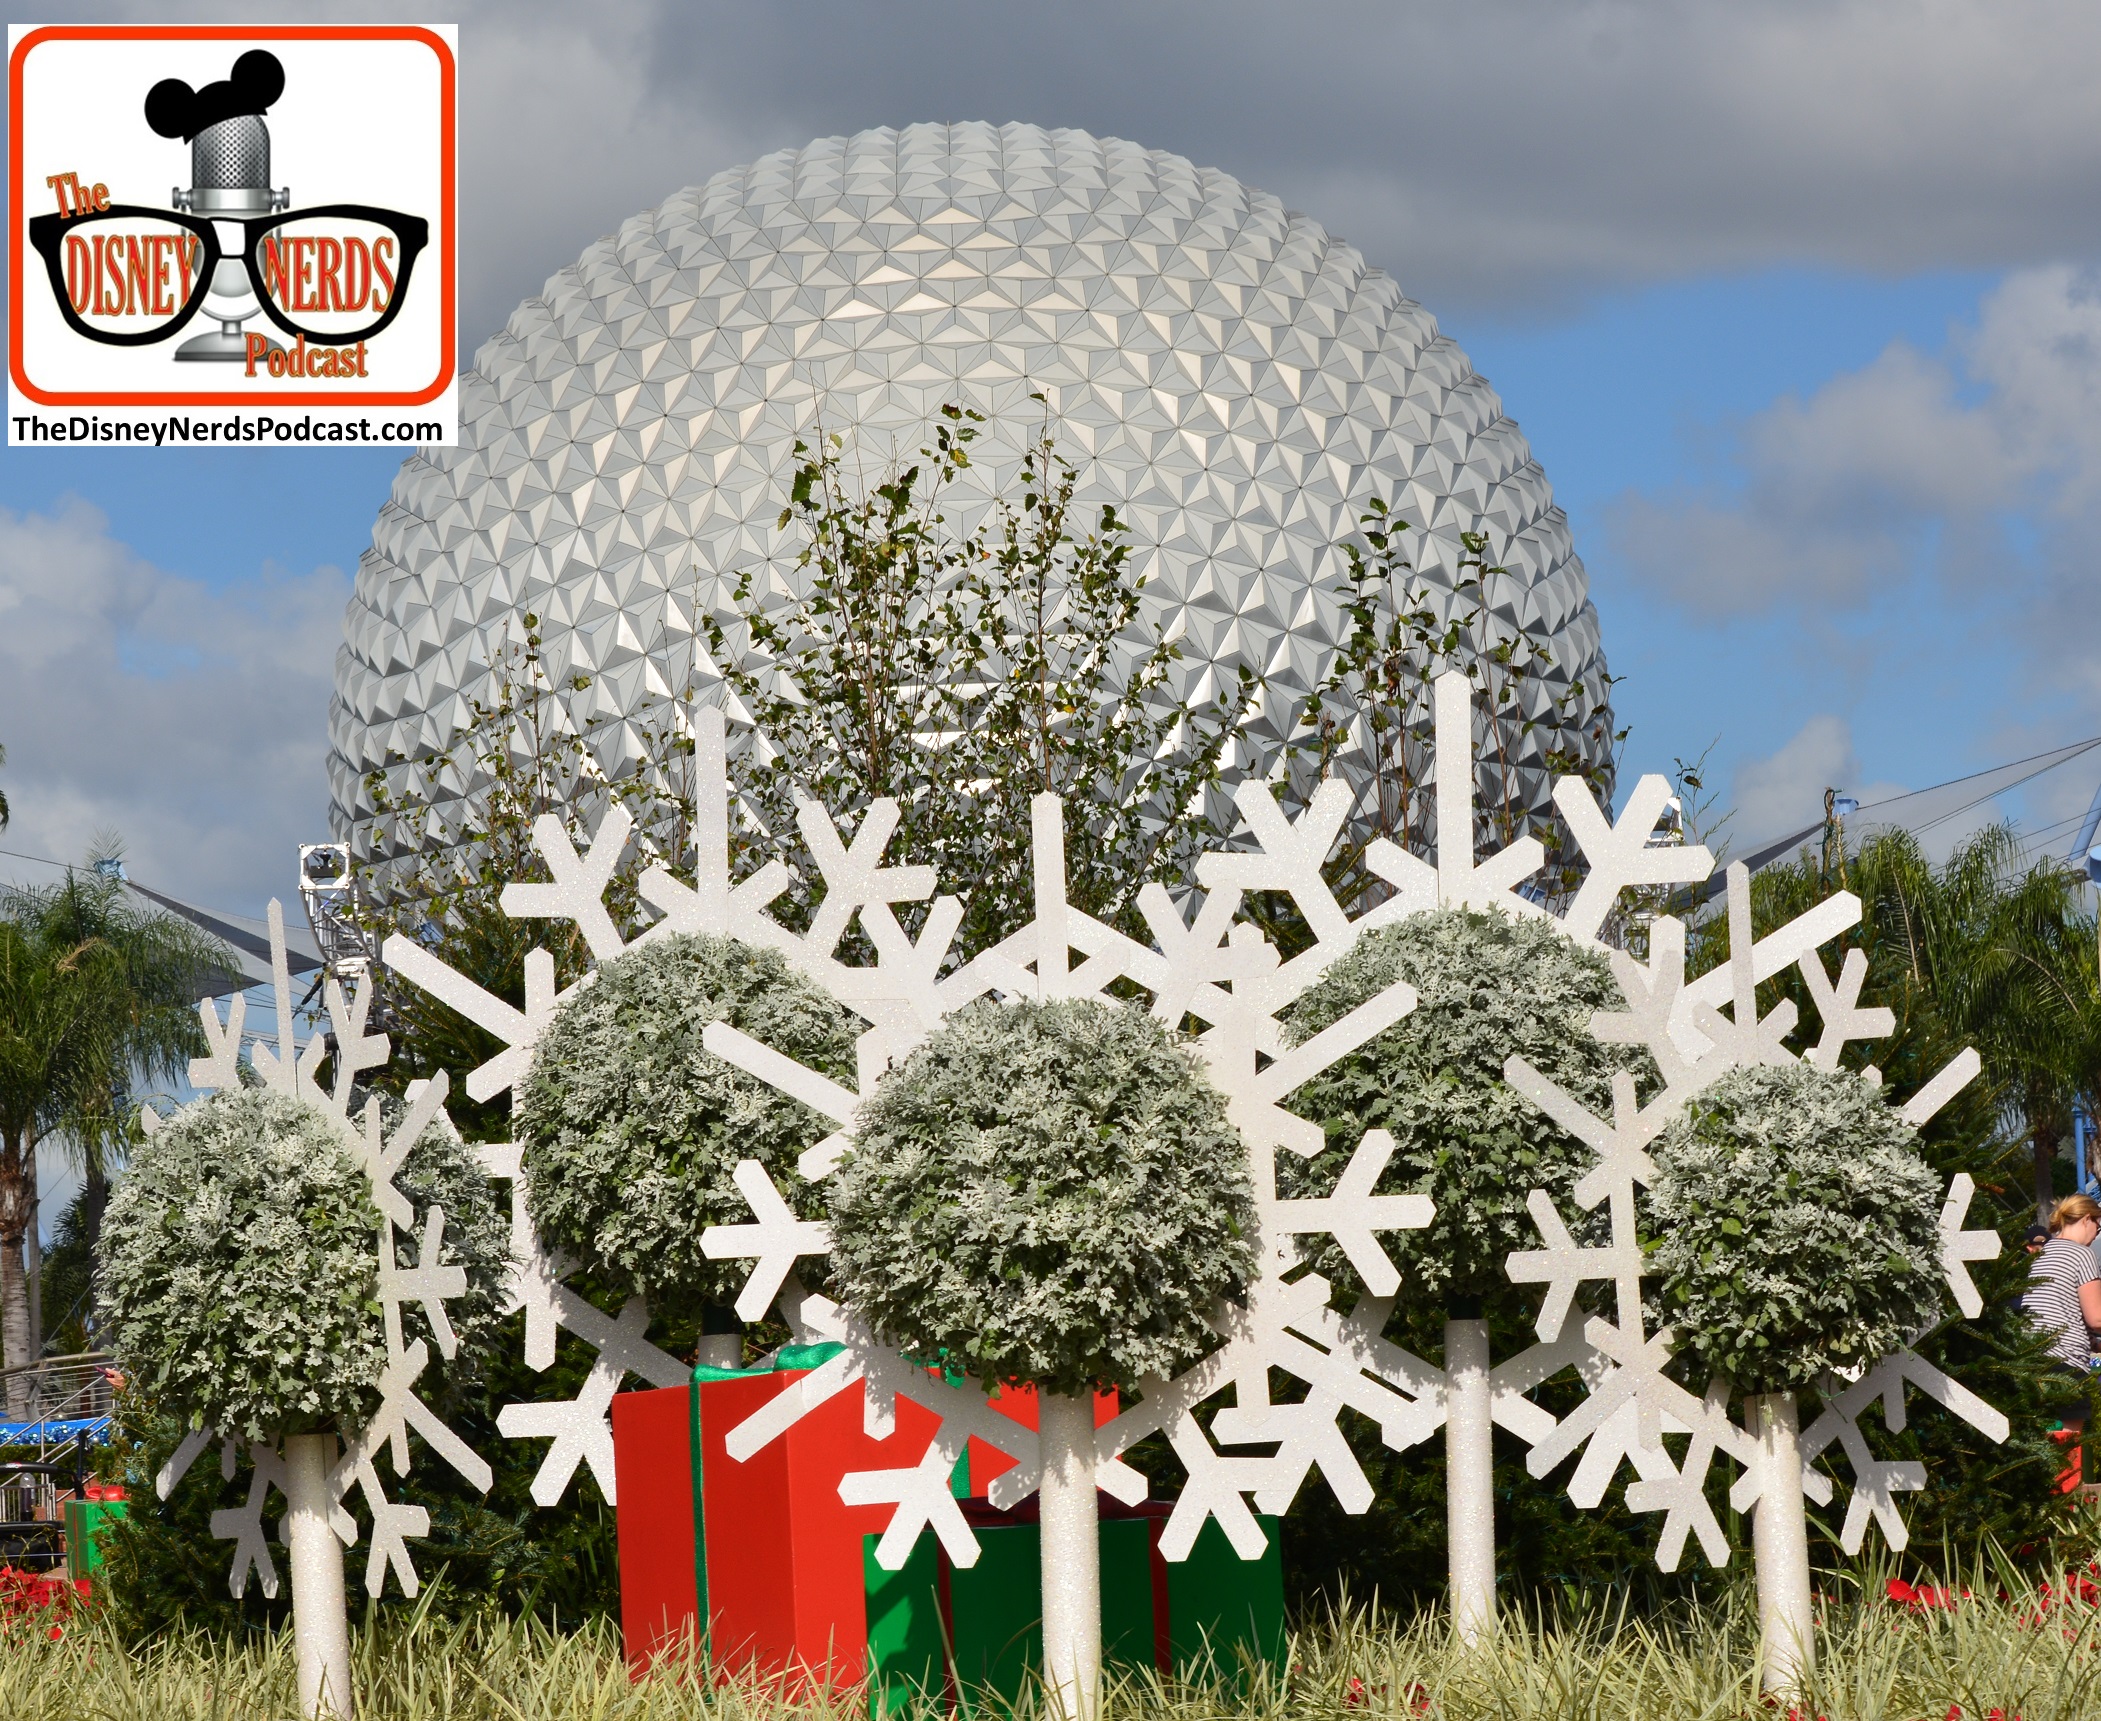 2015-12 - Epcot - The Holidays are in full Swing at Epcot's "Holidays Around the World"